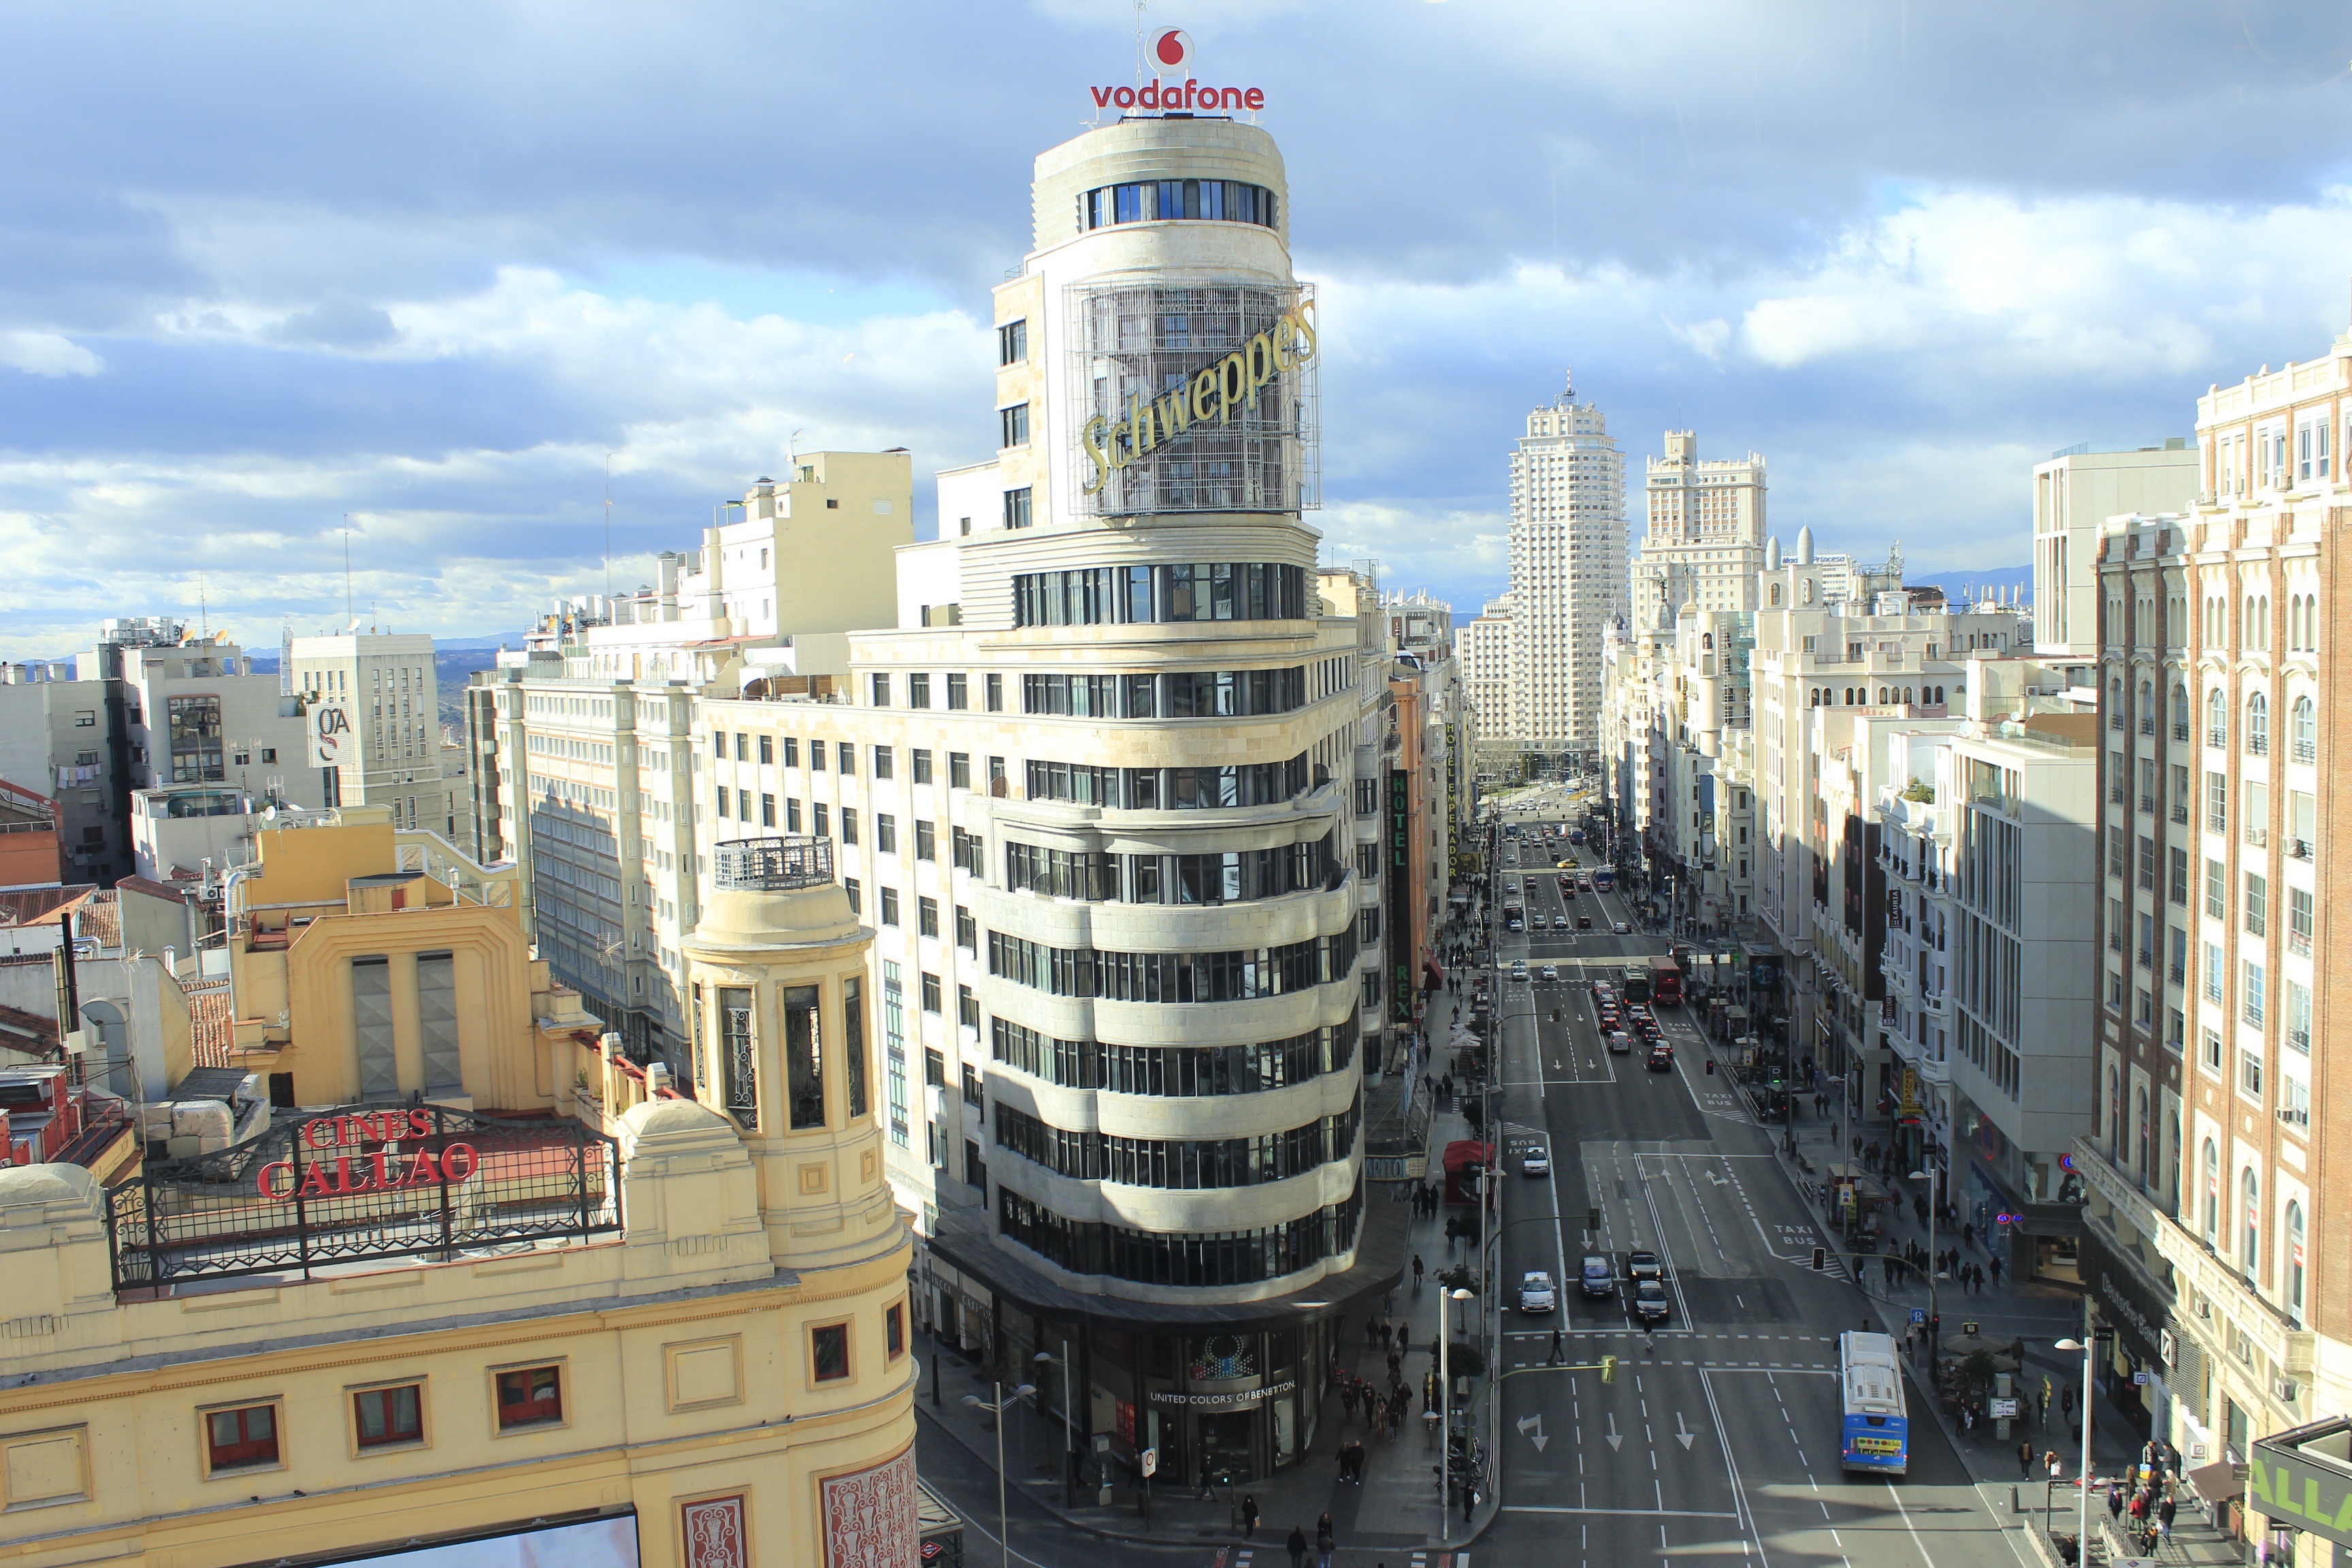 Streets and towers of Madrid image - Free stock photo - Public Domain photo - CC0 Images